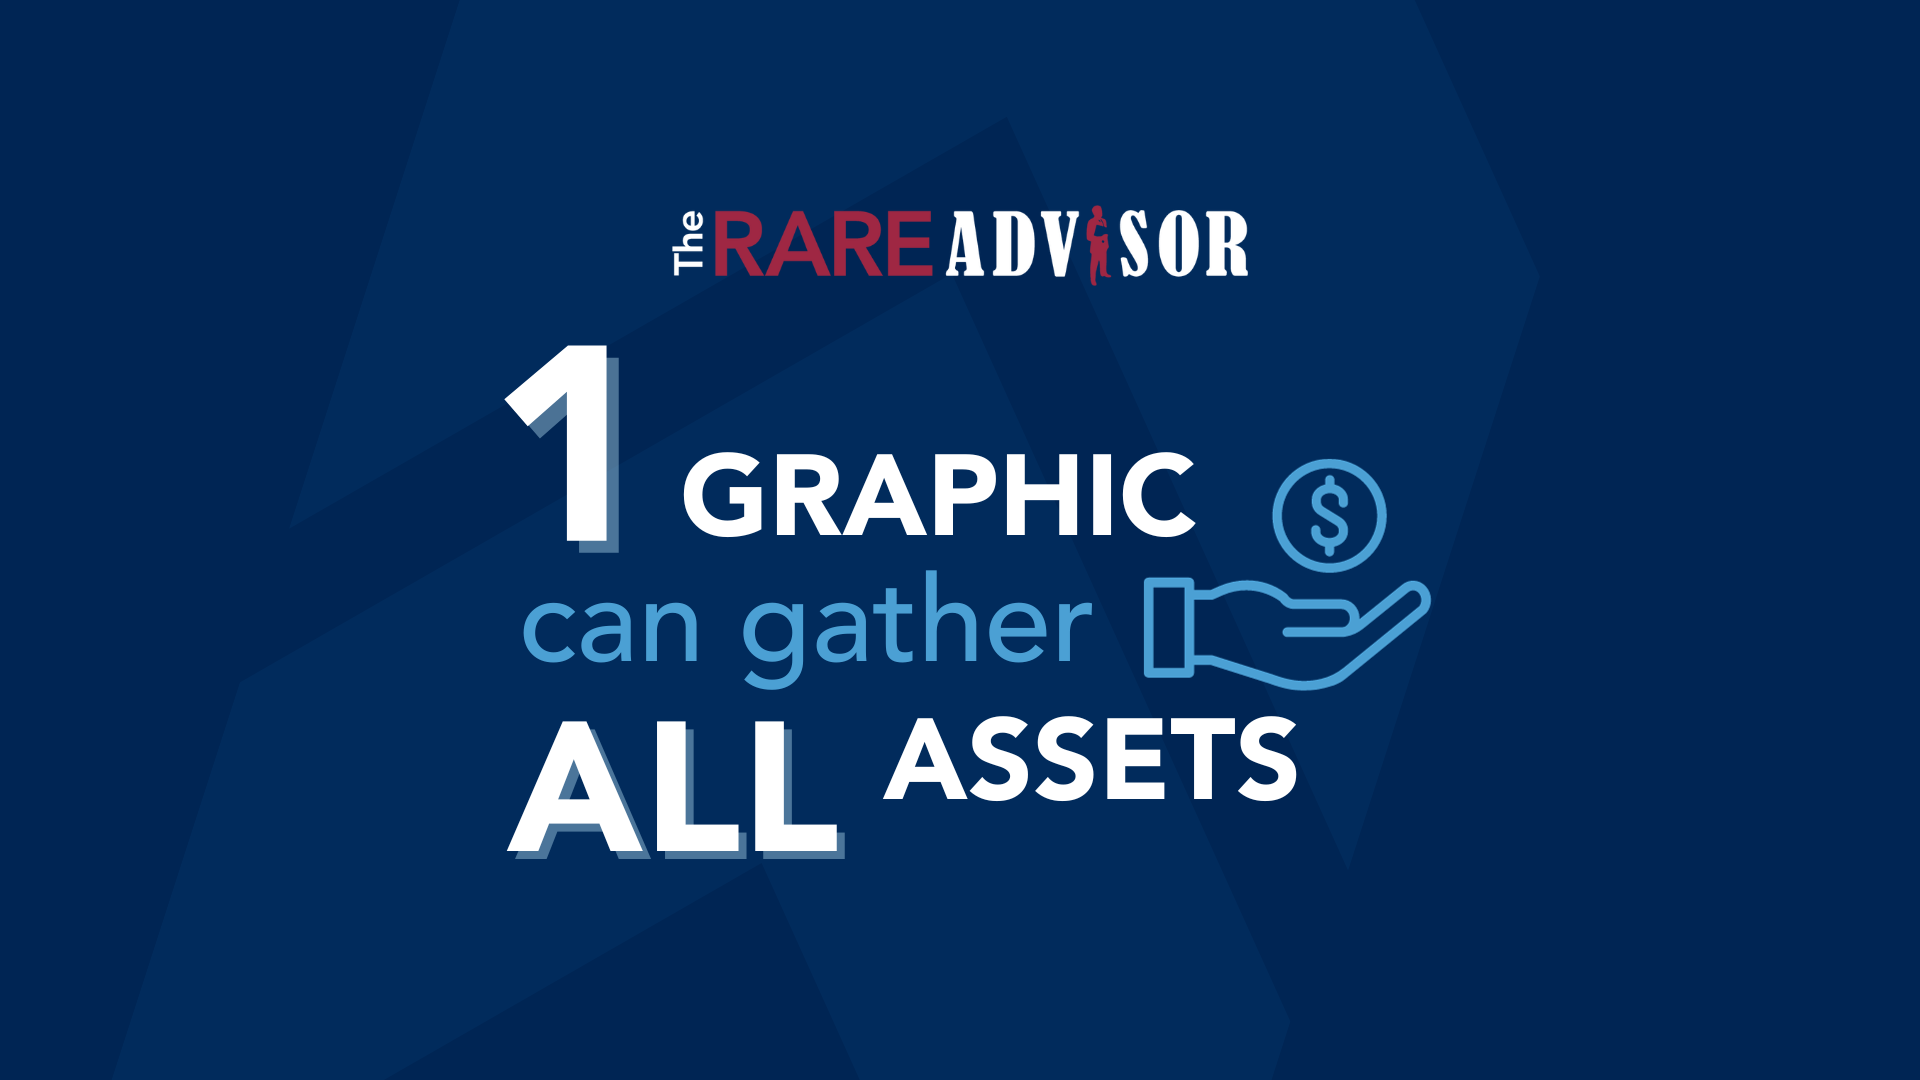 The RARE Advisor: Gather Entire Portfolio of Assets with One Graphic